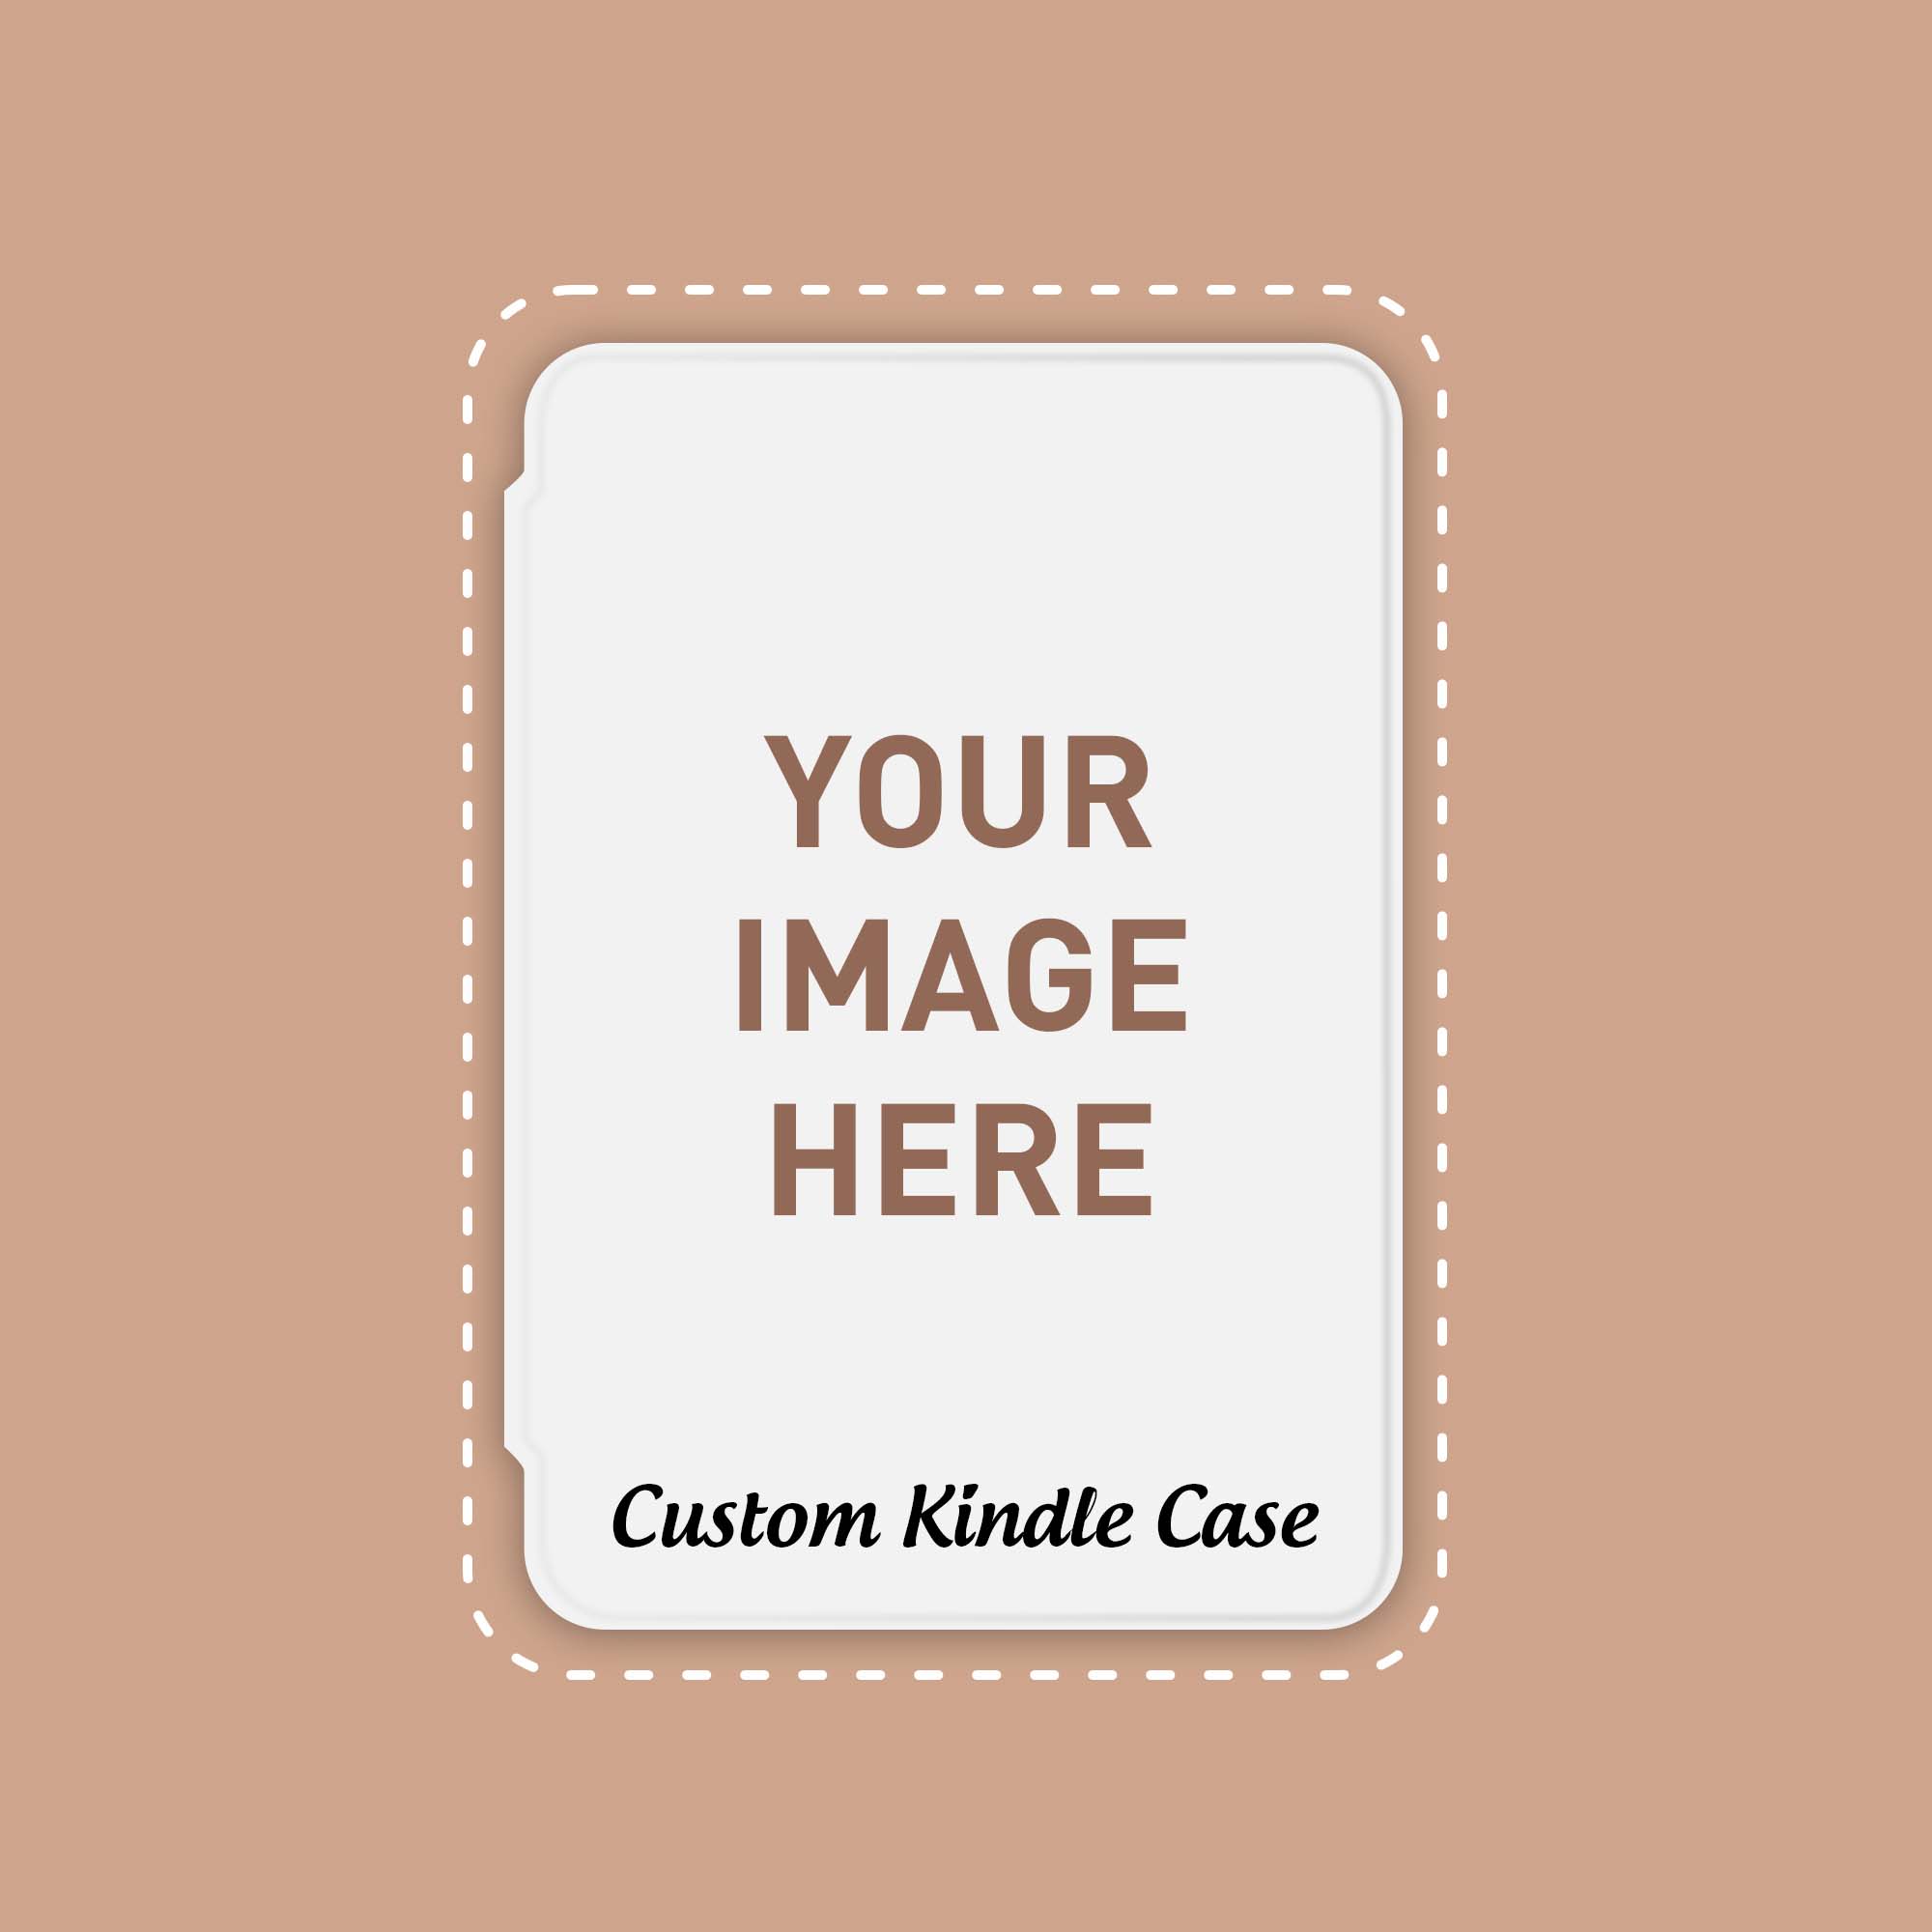 Your photo Kindle custom case, Create Your Own Kindle Case with Book Cover, Photo Cover